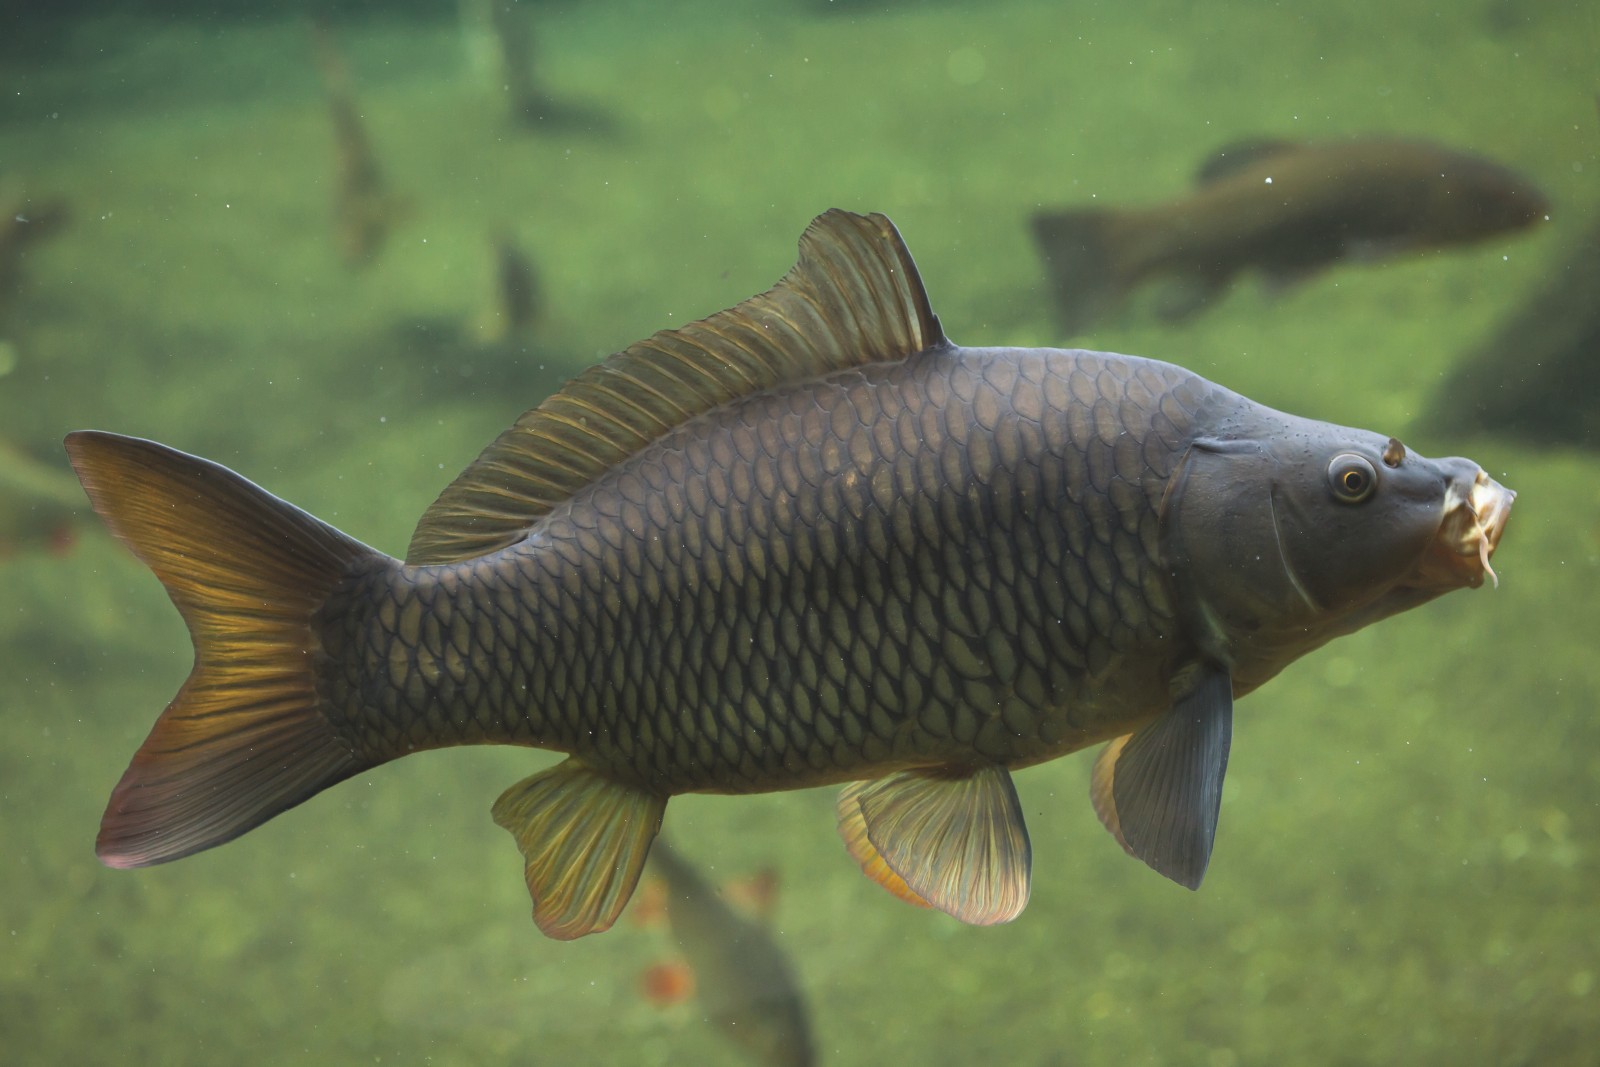 The picture shows an underwater shot of a large carp.